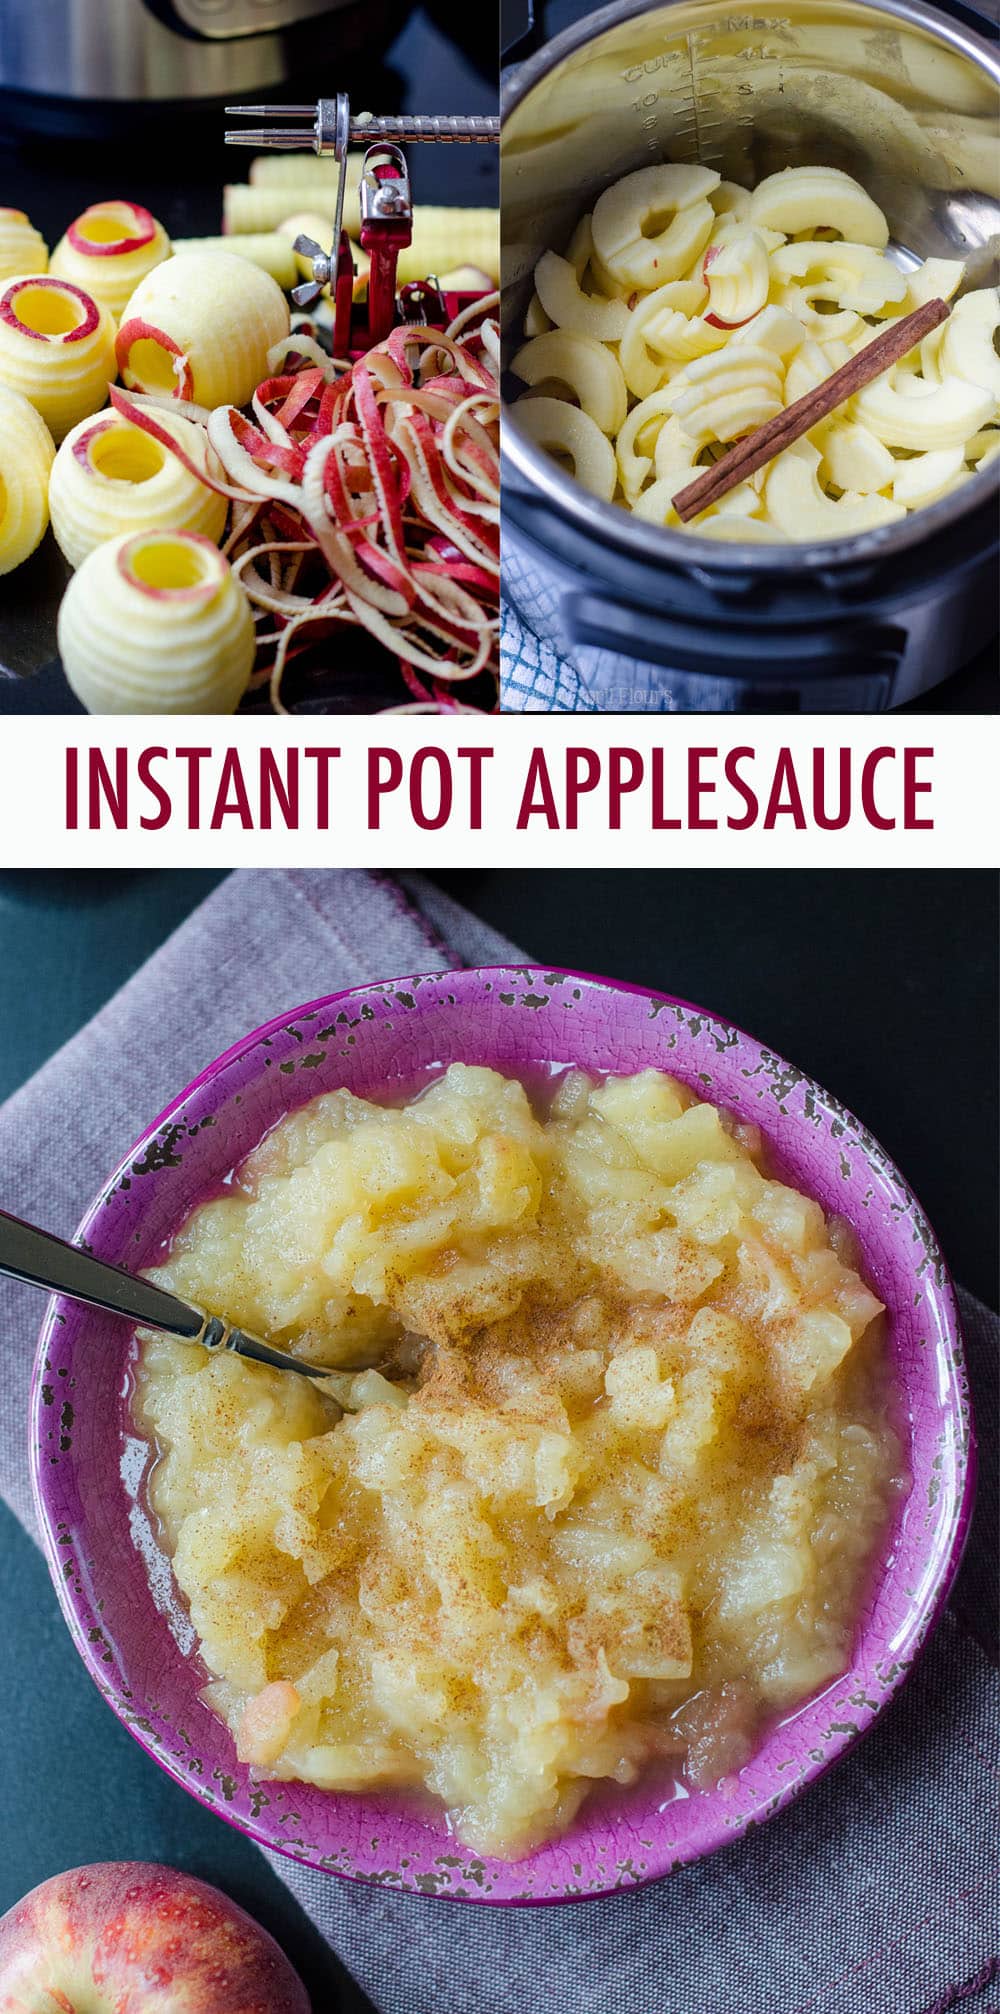 All-natural, no sugar added, homemade applesauce, ready in 4 minutes! via @frshaprilflours